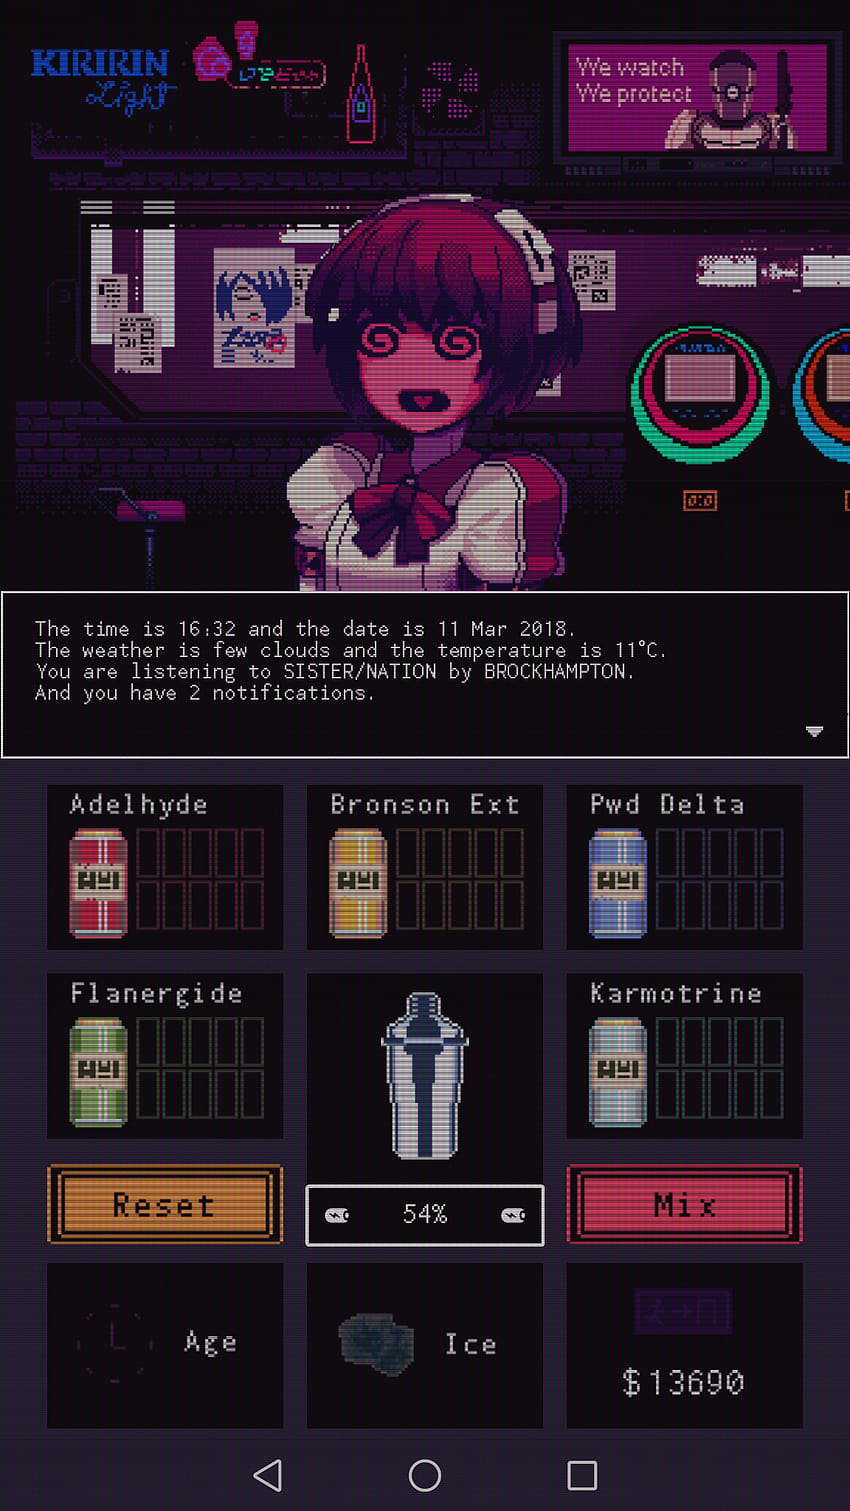 20 VA11 HallA Cyberpunk Bartender Action HD Wallpapers and Backgrounds